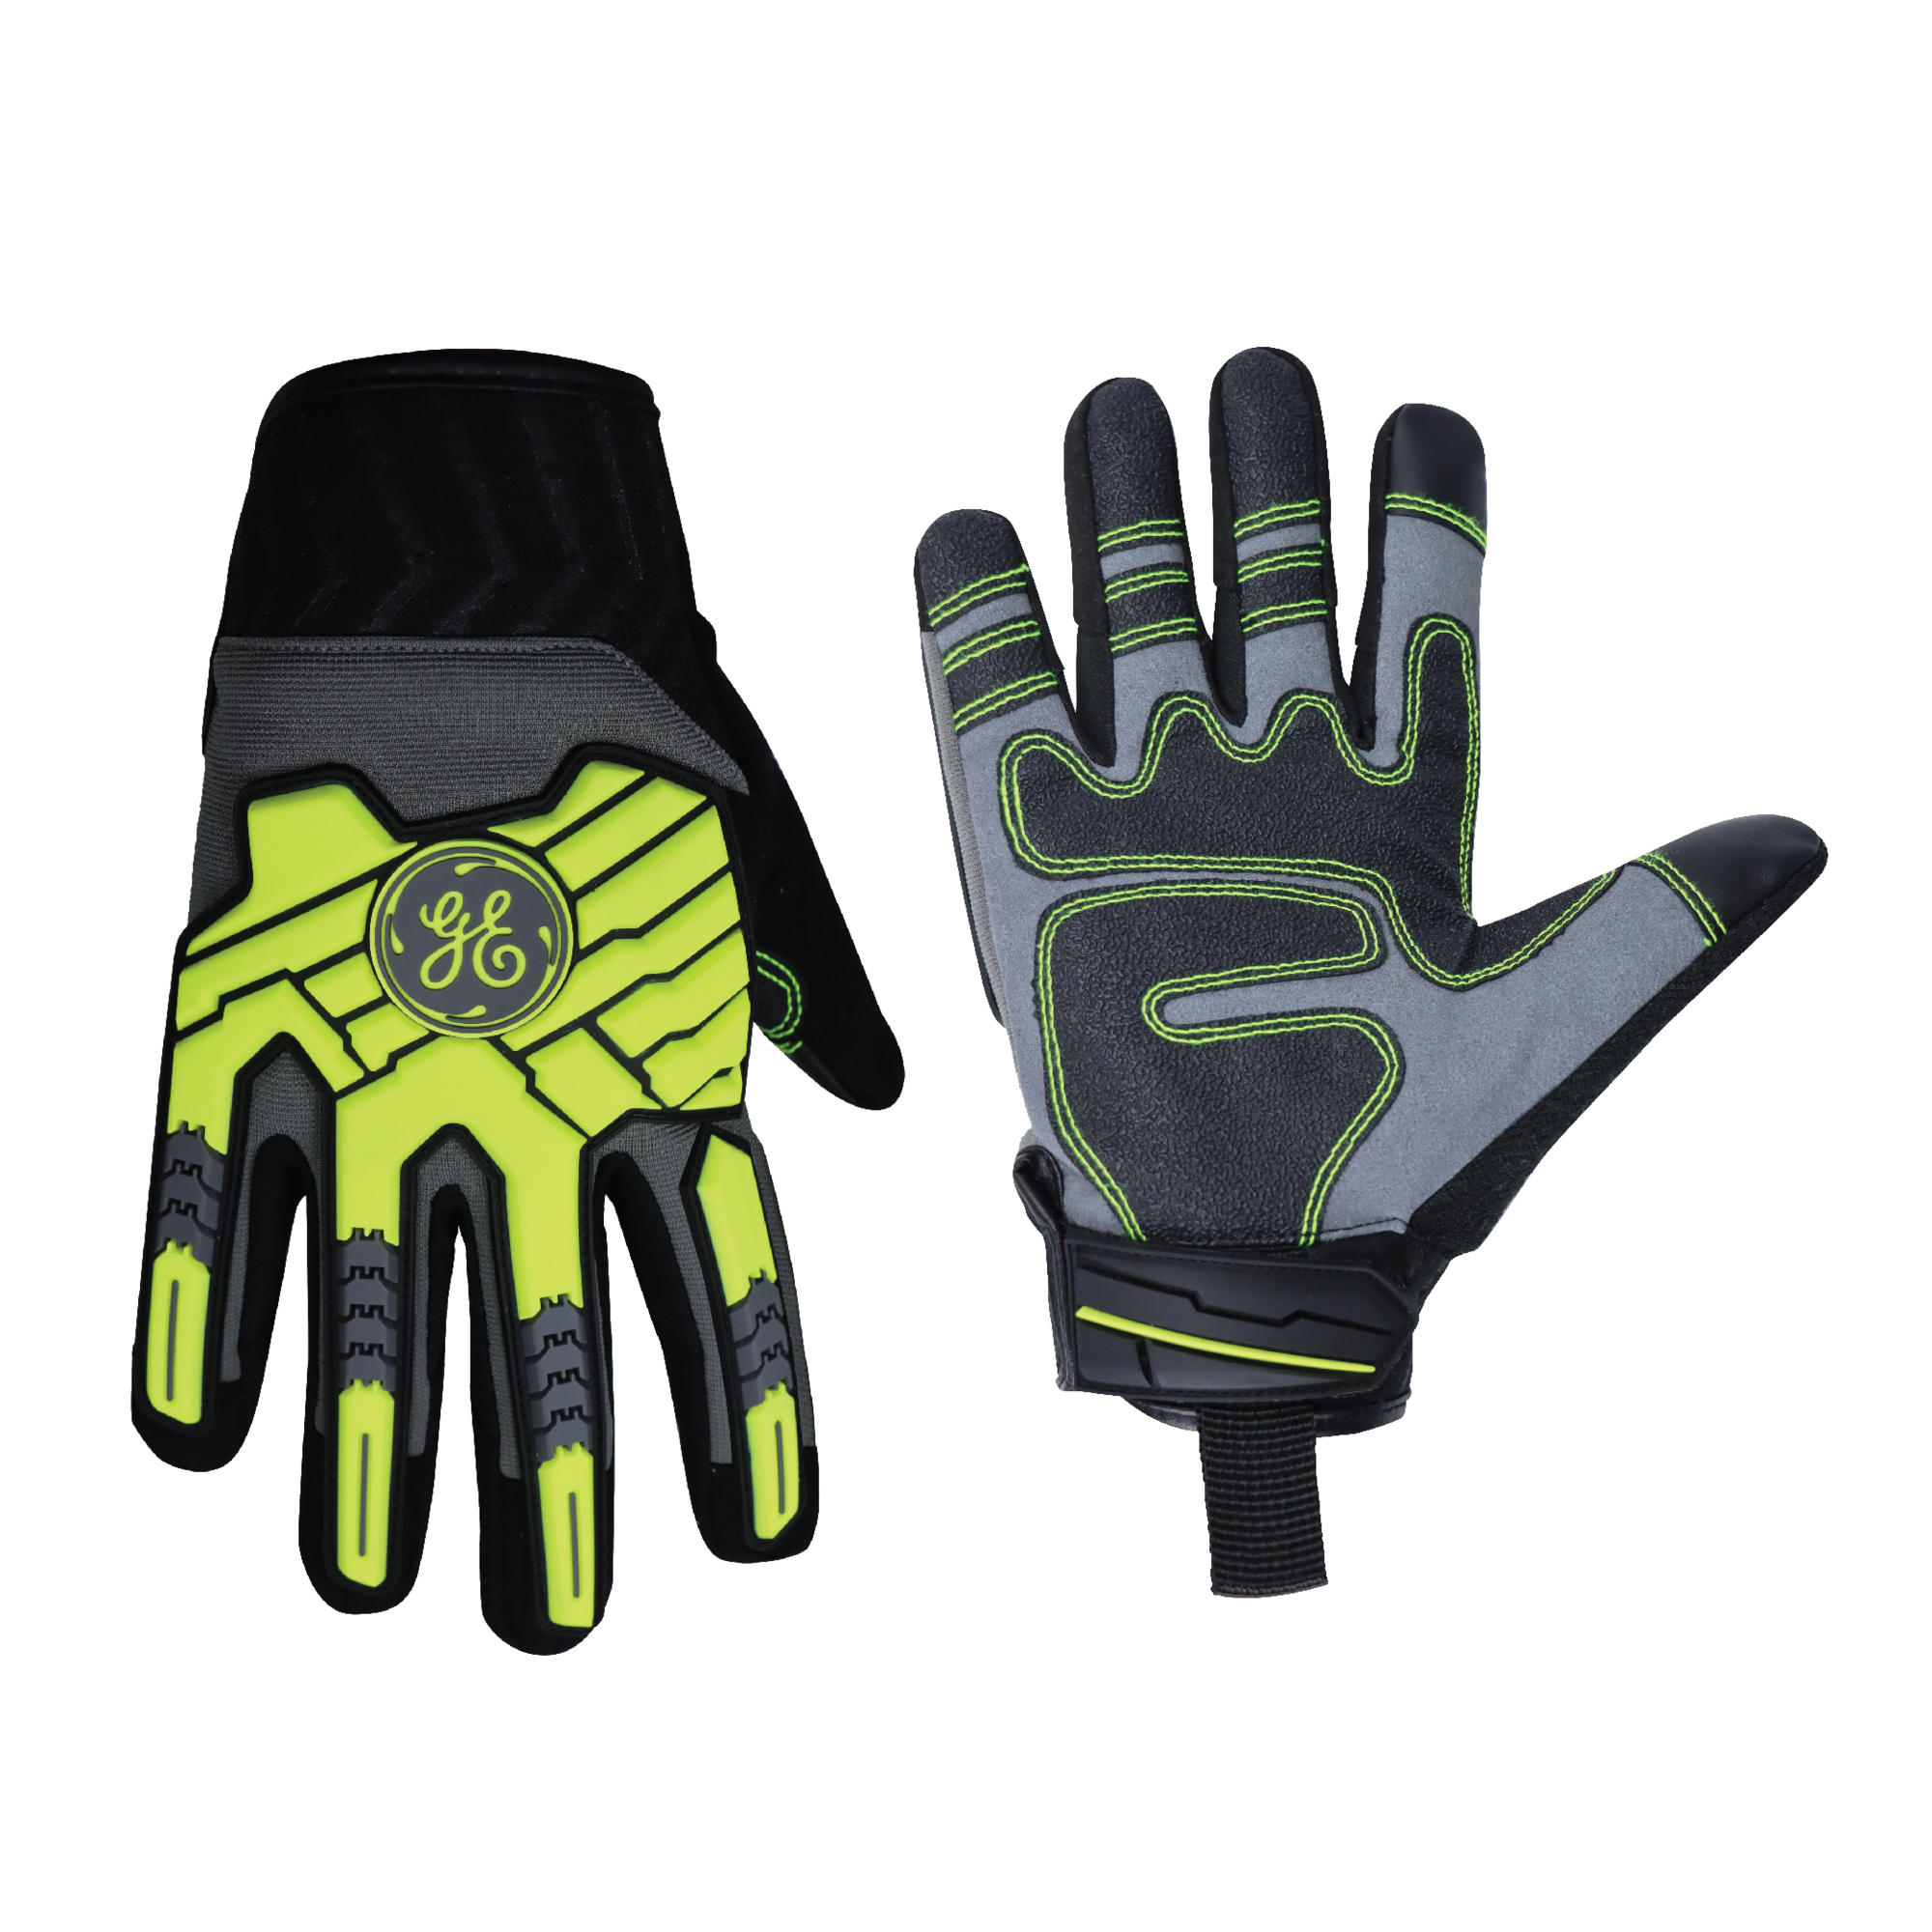 General Electric, Mechanic's Glove High-Vis Green L 1 pair, Size L, Included (qty.) 1, Model GG417LC